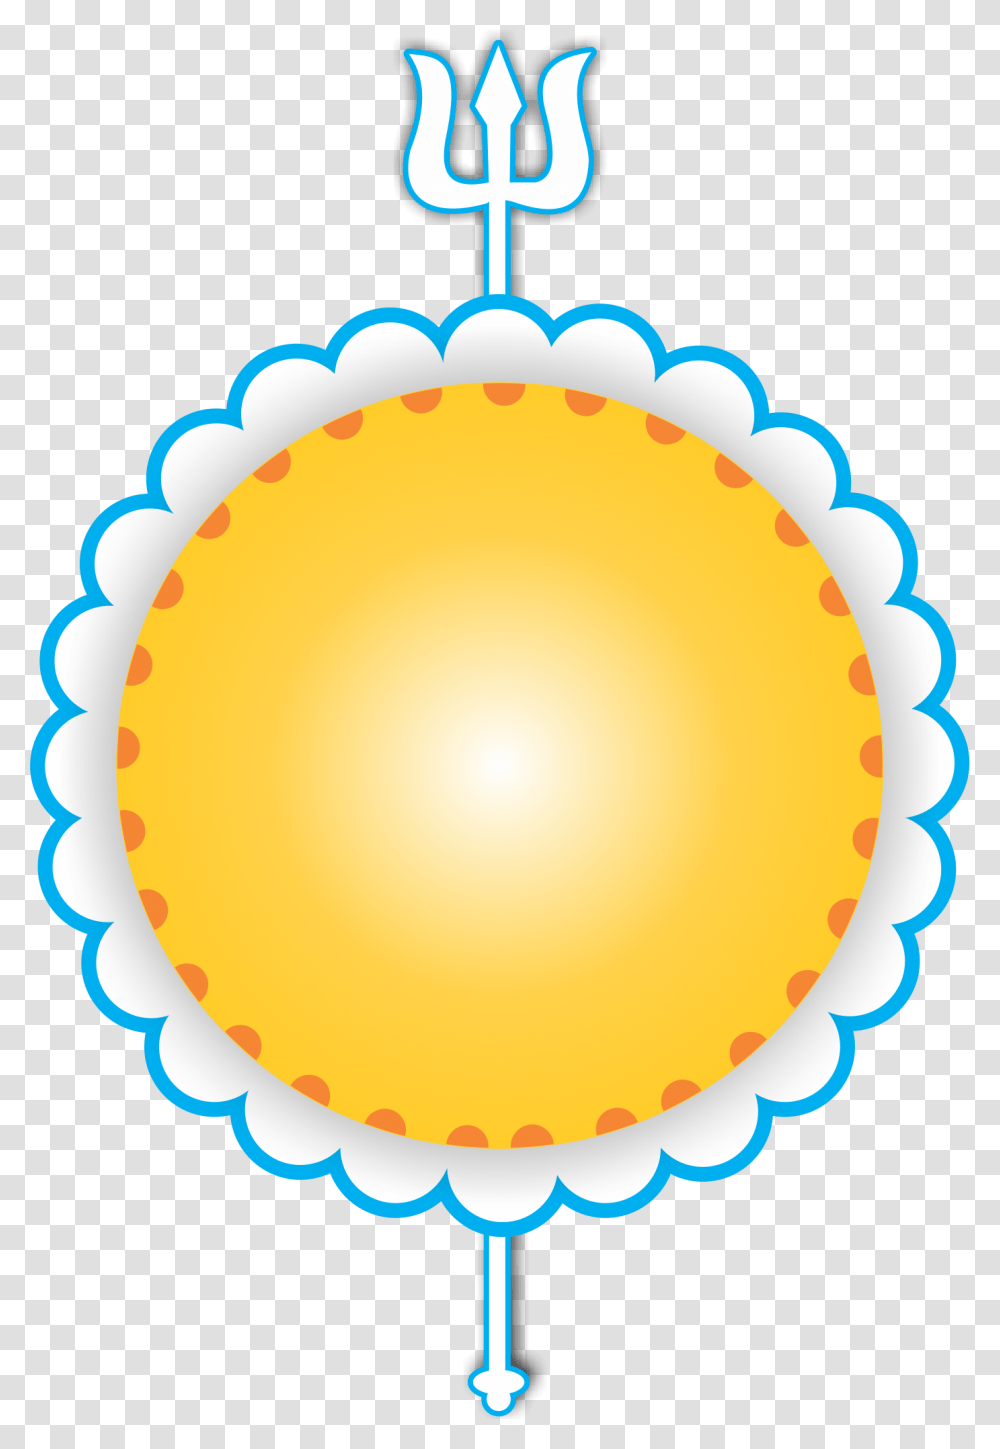 Puja Offer Design Circle, Birthday Cake, Food, Balloon, Gold Transparent Png